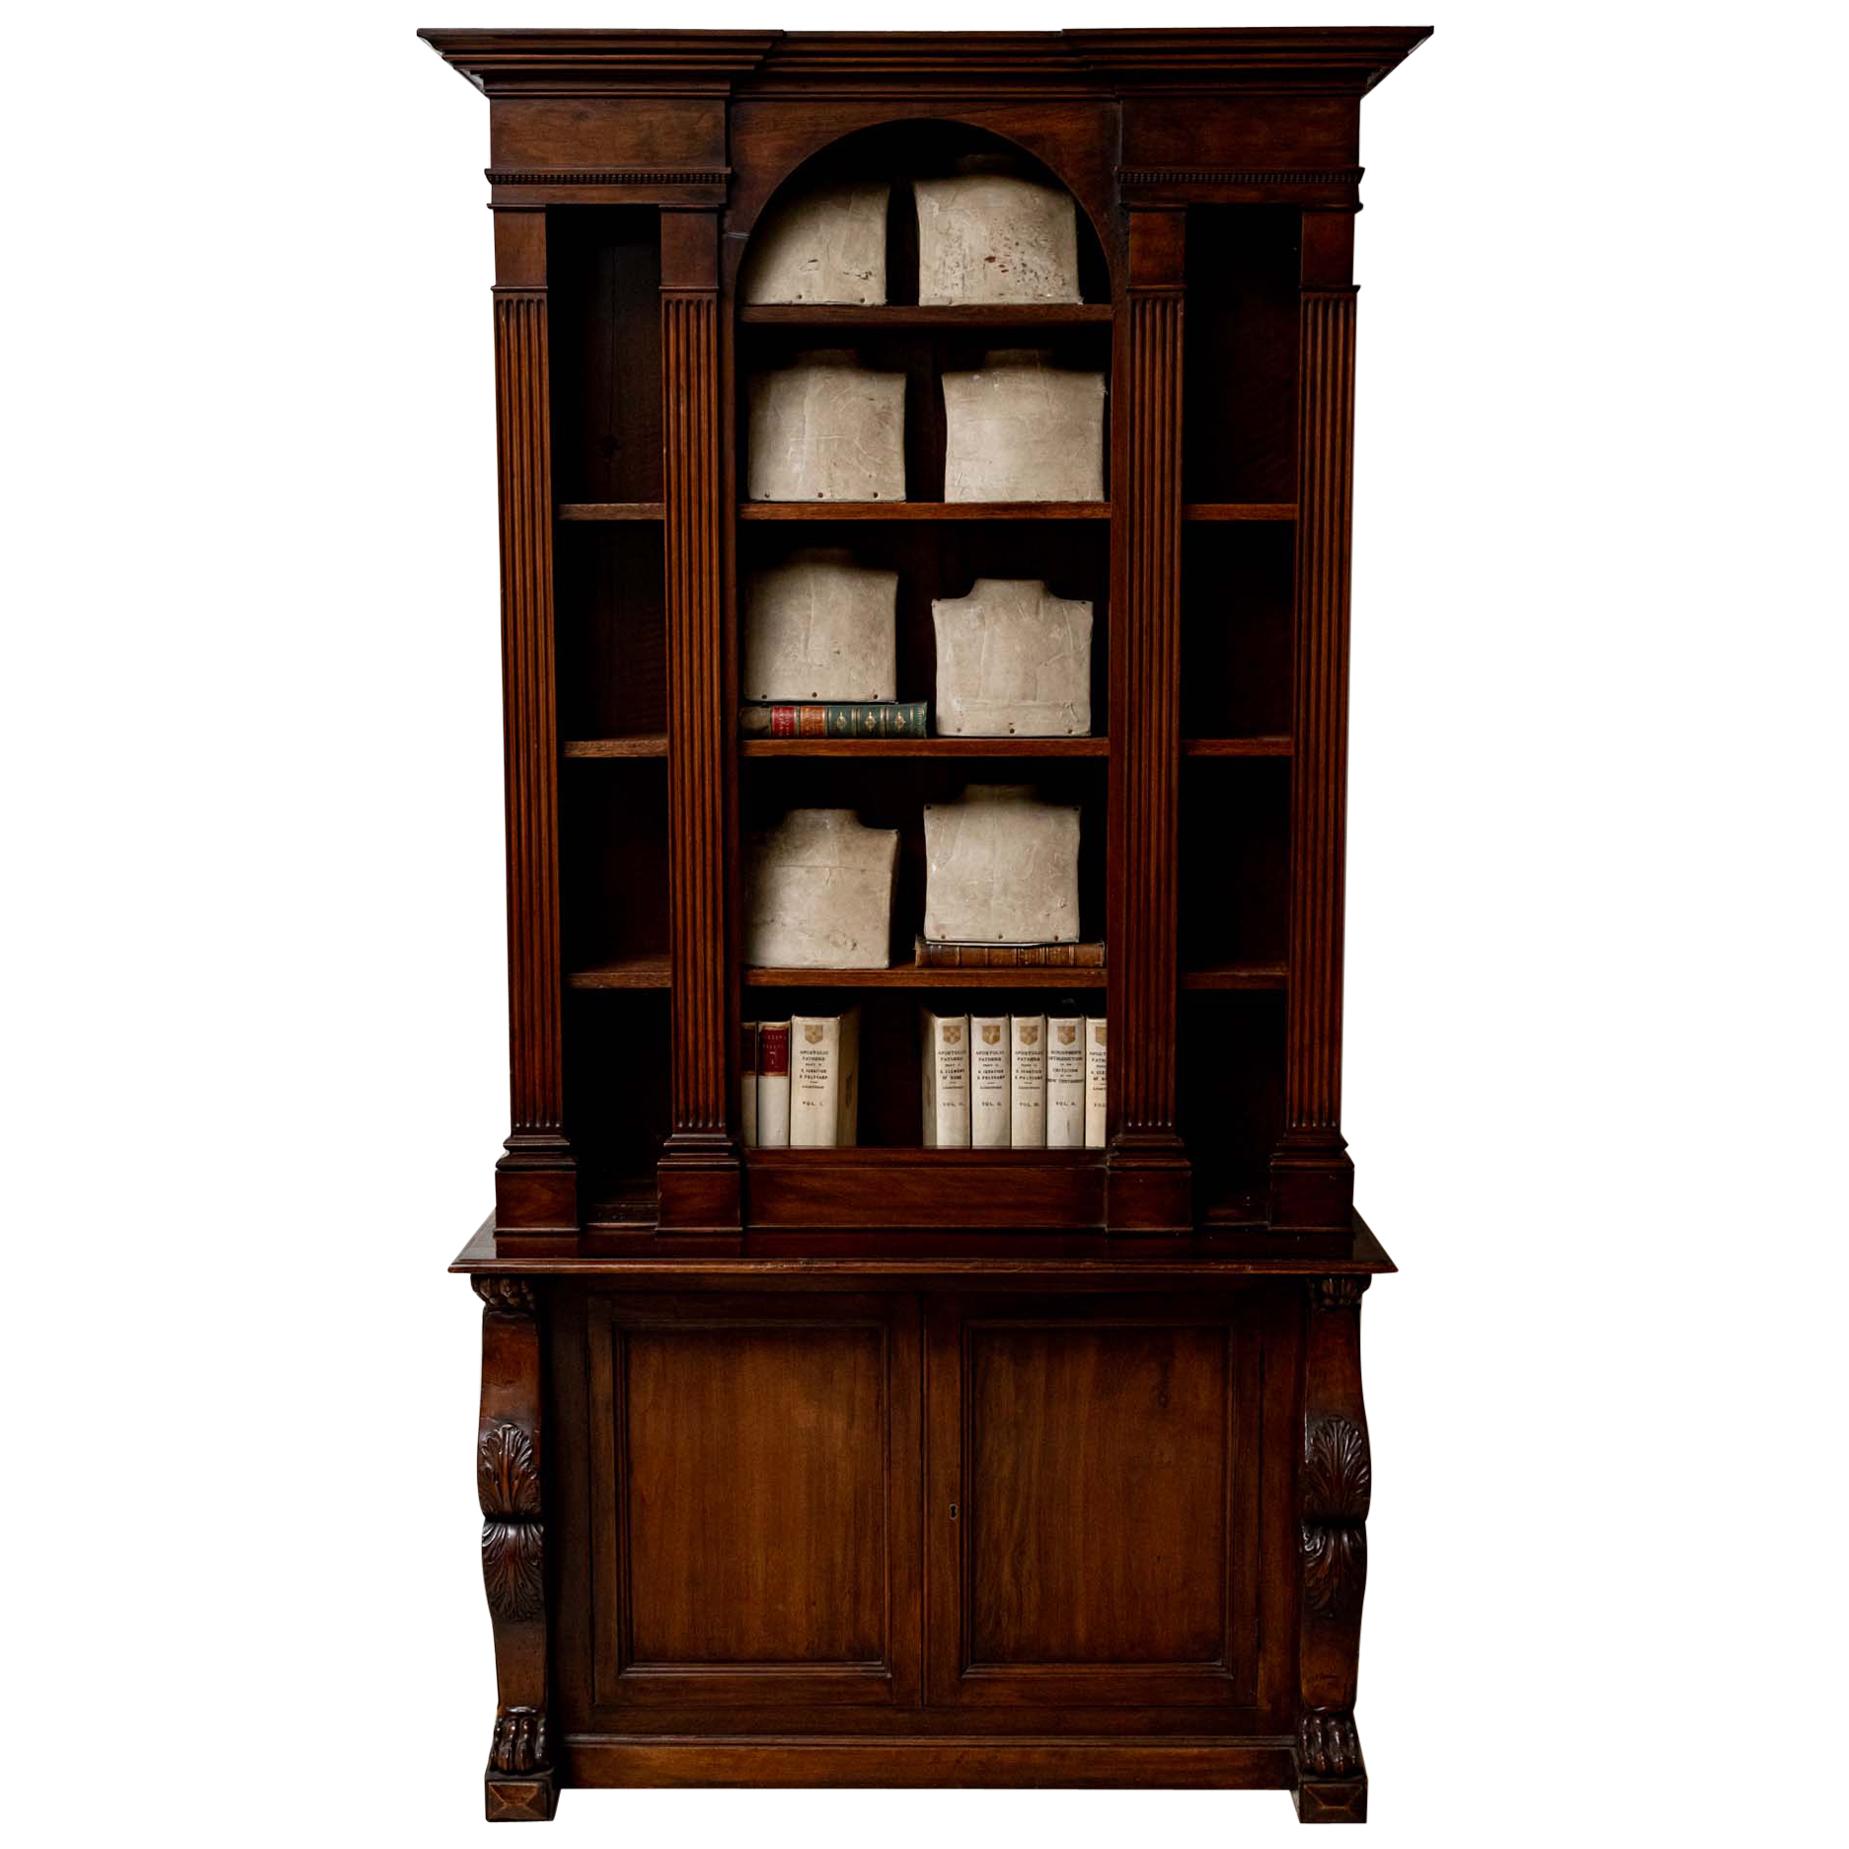 19th Century French Classical Mahogany Bookcase Cabinet Formerly a Gun Cabinet